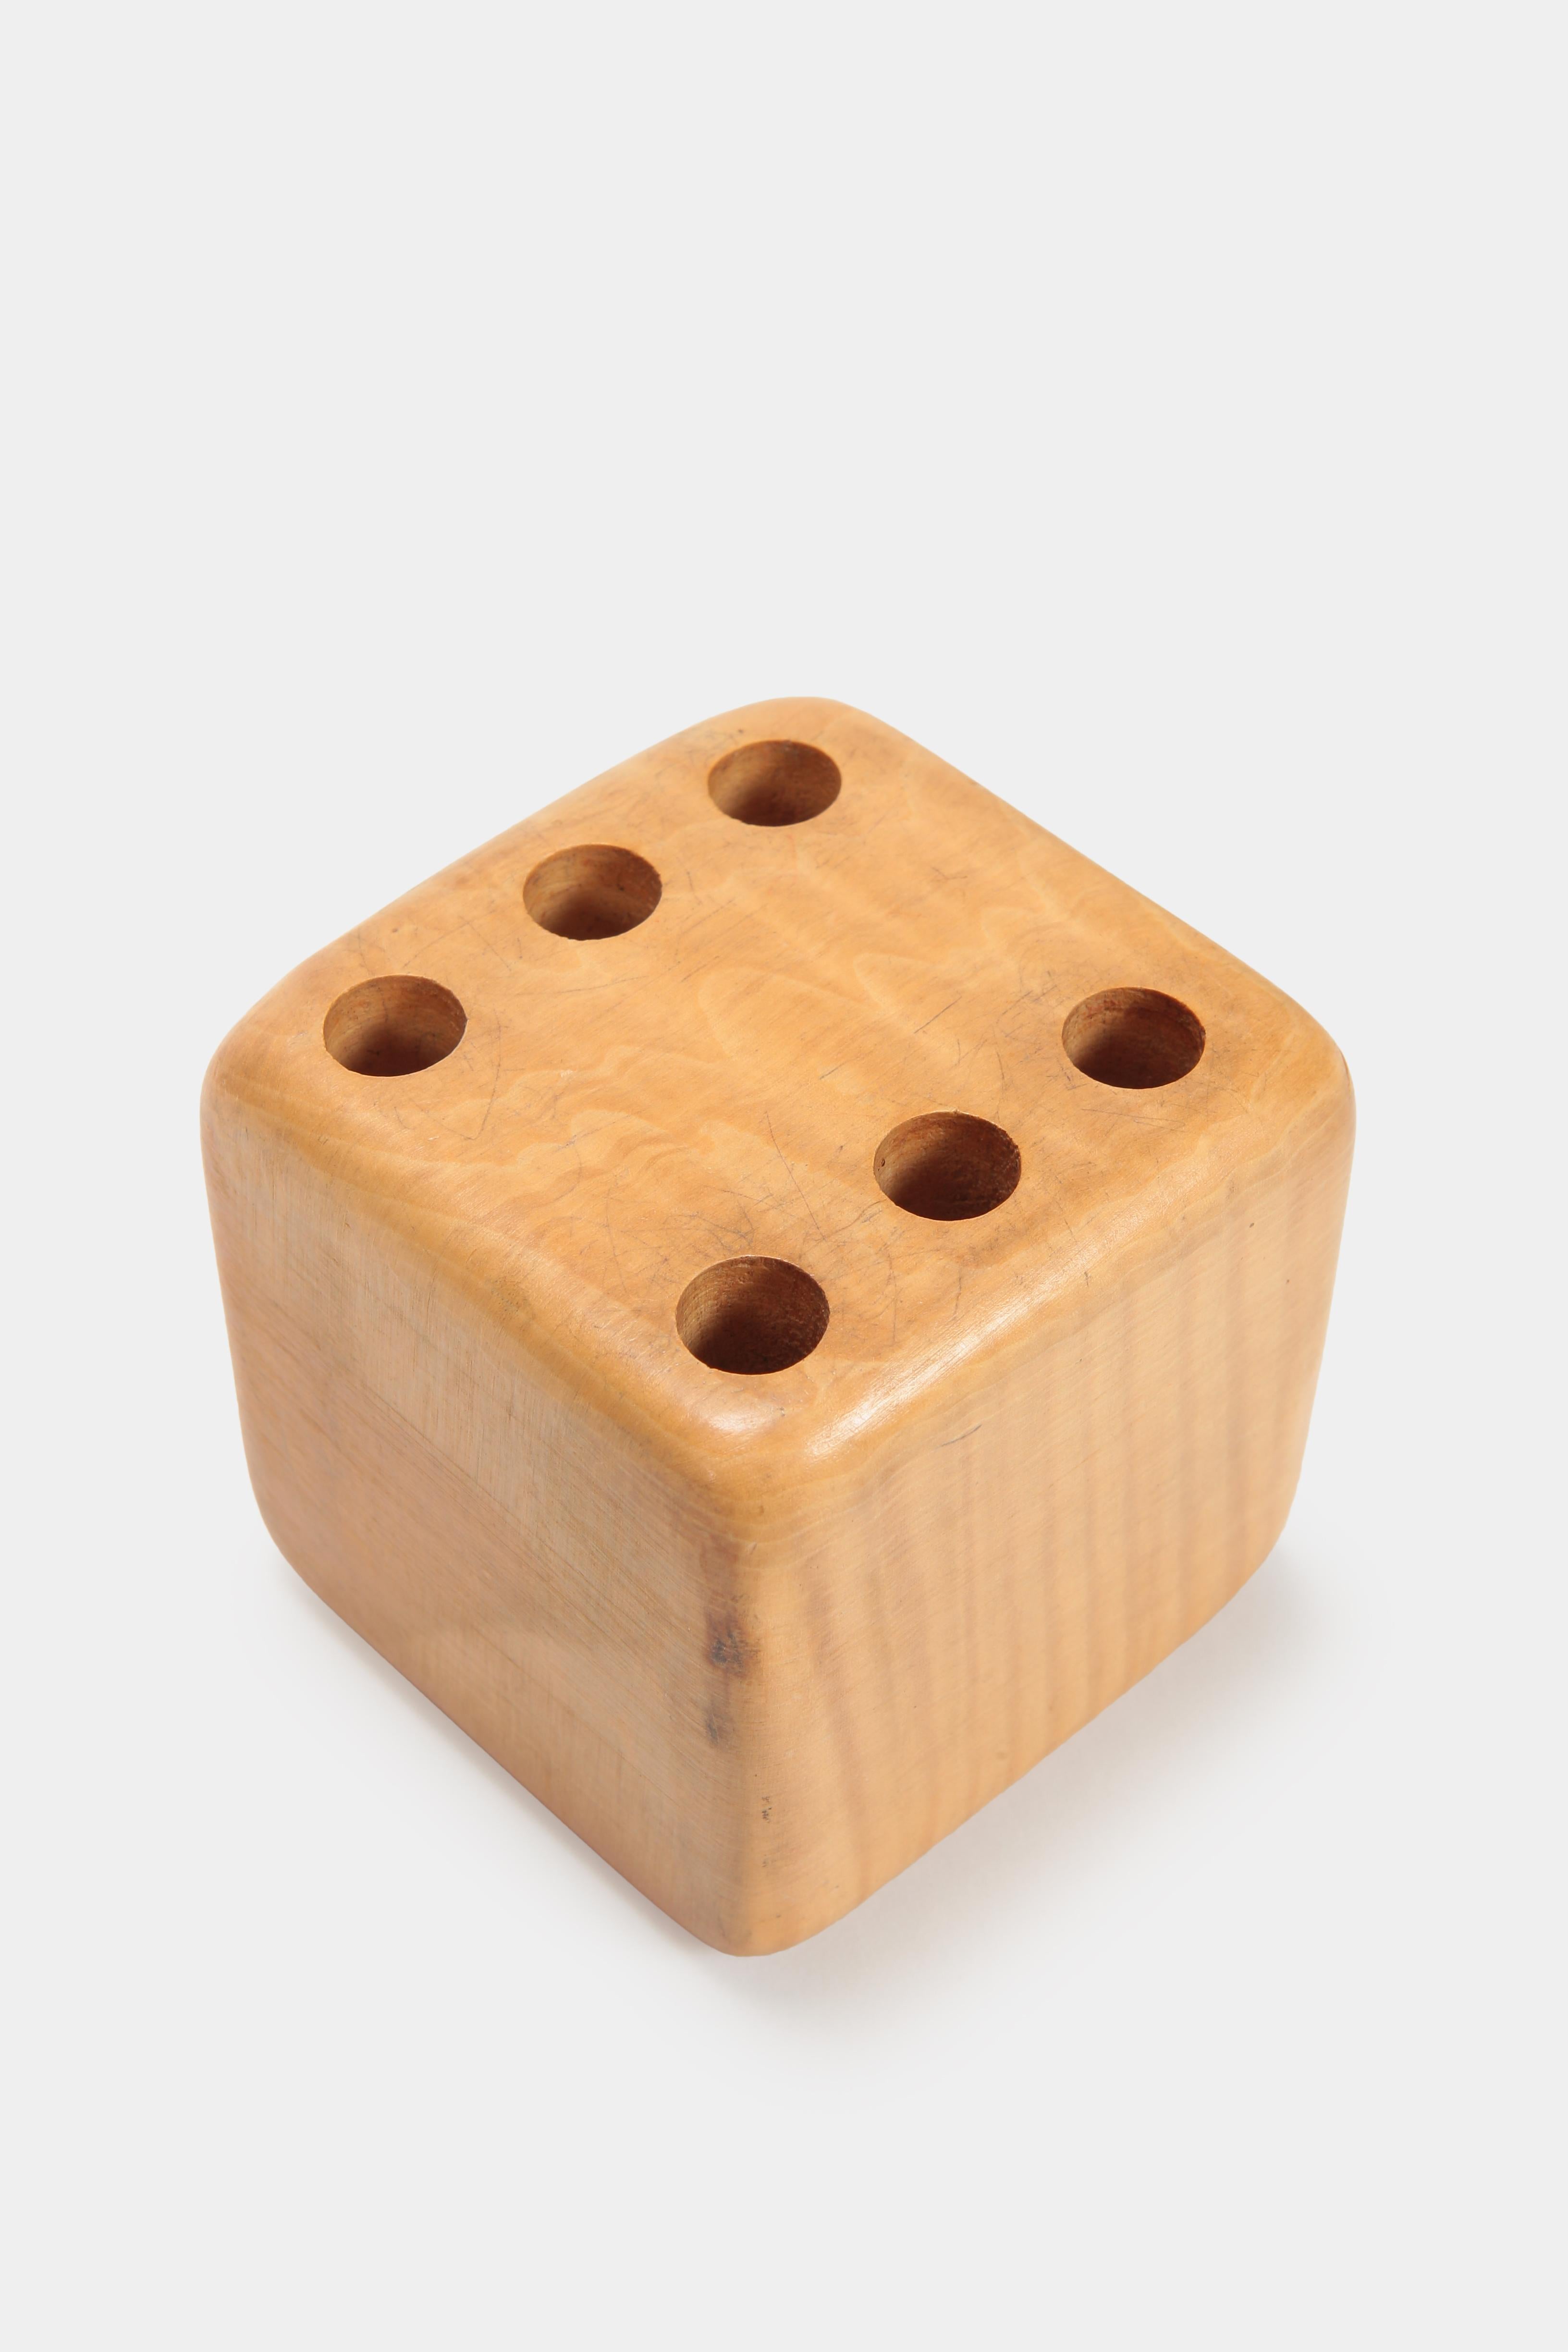 Sigvard Nilsson pen holder manufactured by Söwe in the 1970s in Sweden. Cube shaped pen holder made of solid maple wood with six holes. Manufacturers stamp.